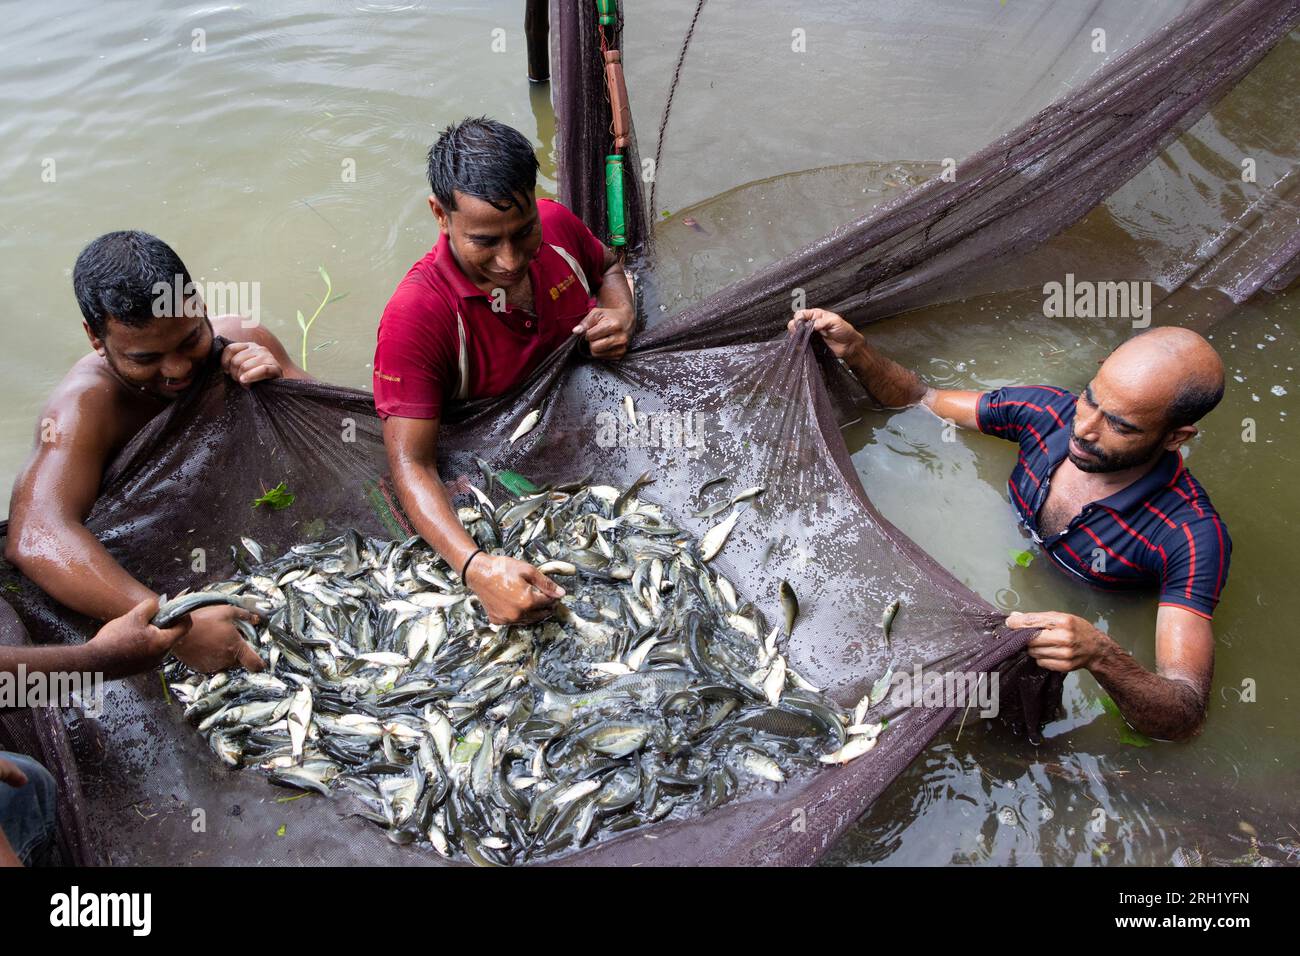 https://c8.alamy.com/comp/2RH1YFN/munshiganj-dhaka-bangladesh-13th-aug-2023-fishermen-catch-fish-in-a-pond-in-munshiganj-bangladesh-they-practice-traditional-methods-by-casting-a-huge-net-that-catches-a-handful-of-tiny-fish-after-dropping-the-net-from-the-bank-in-a-semi-circle-they-wade-out-into-the-shallow-water-of-the-pond-pulling-it-as-wide-as-possible-fish-farming-made-many-people-financially-solvent-along-with-boosting-their-social-dignity-and-contributing-to-meet-the-demand-for-animal-protein-across-the-country-credit-zuma-press-incalamy-live-news-2RH1YFN.jpg